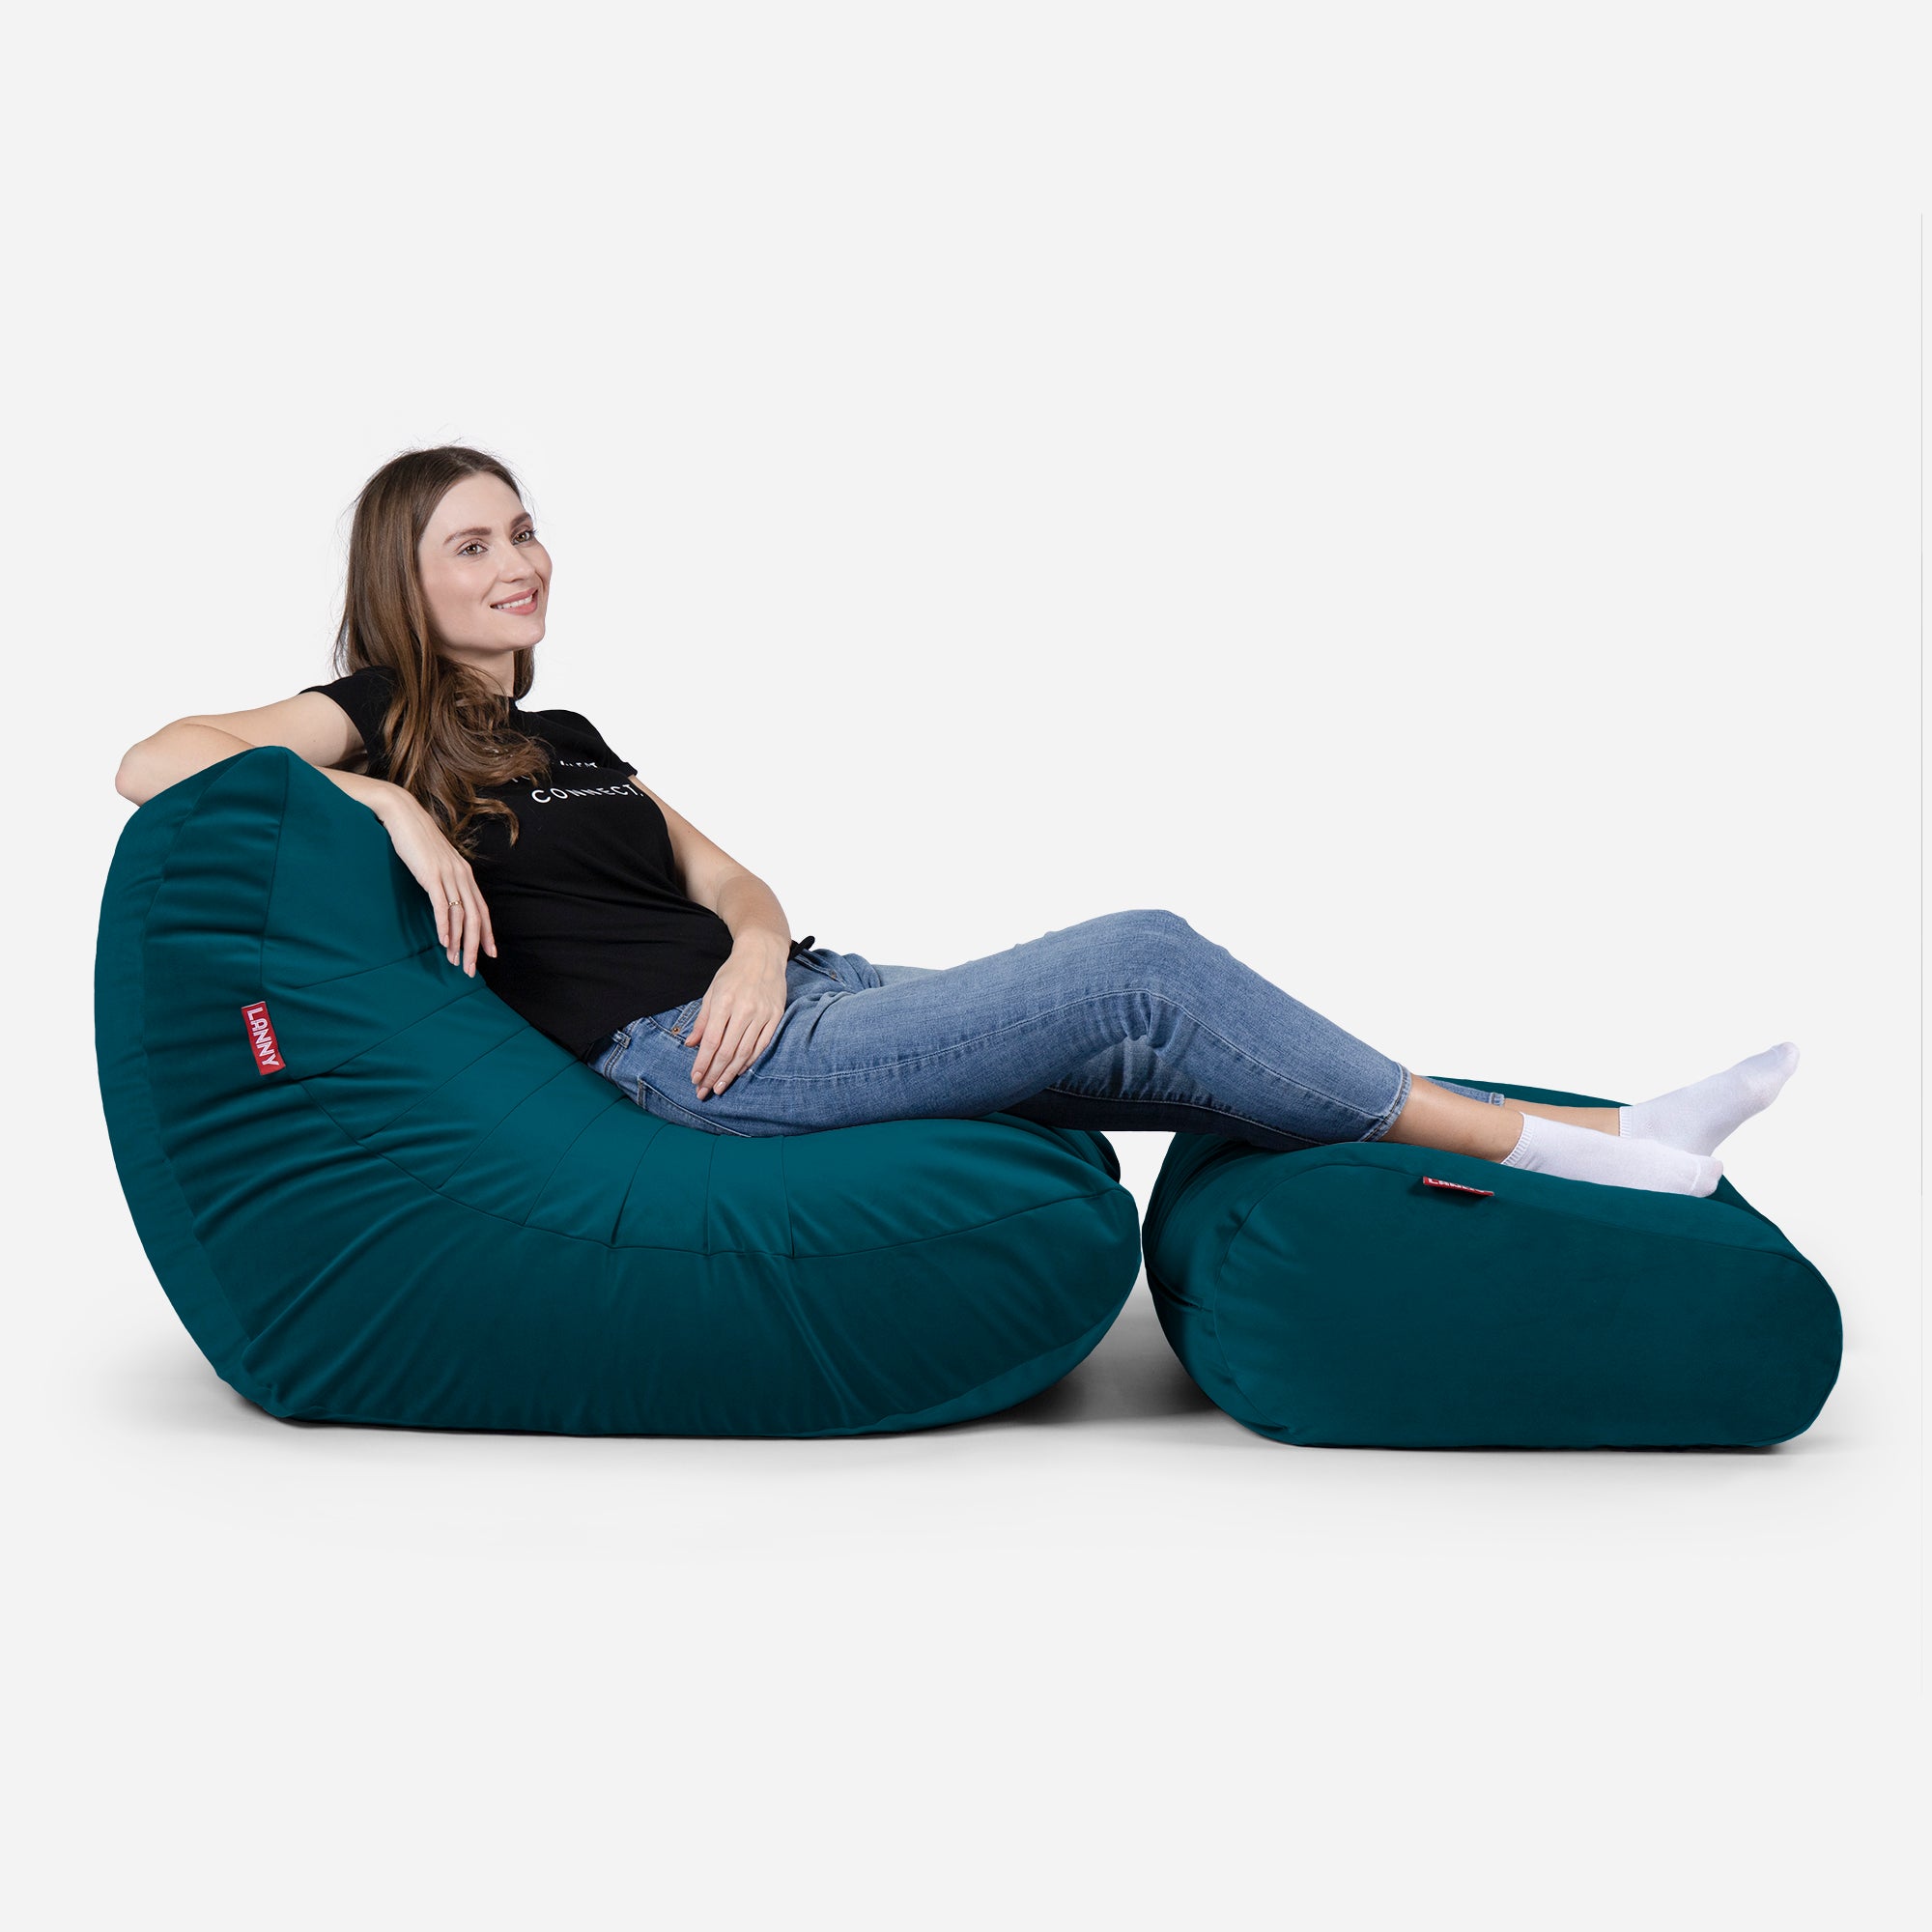 Beanbag Curvy Design aqua color with girl seating on it 